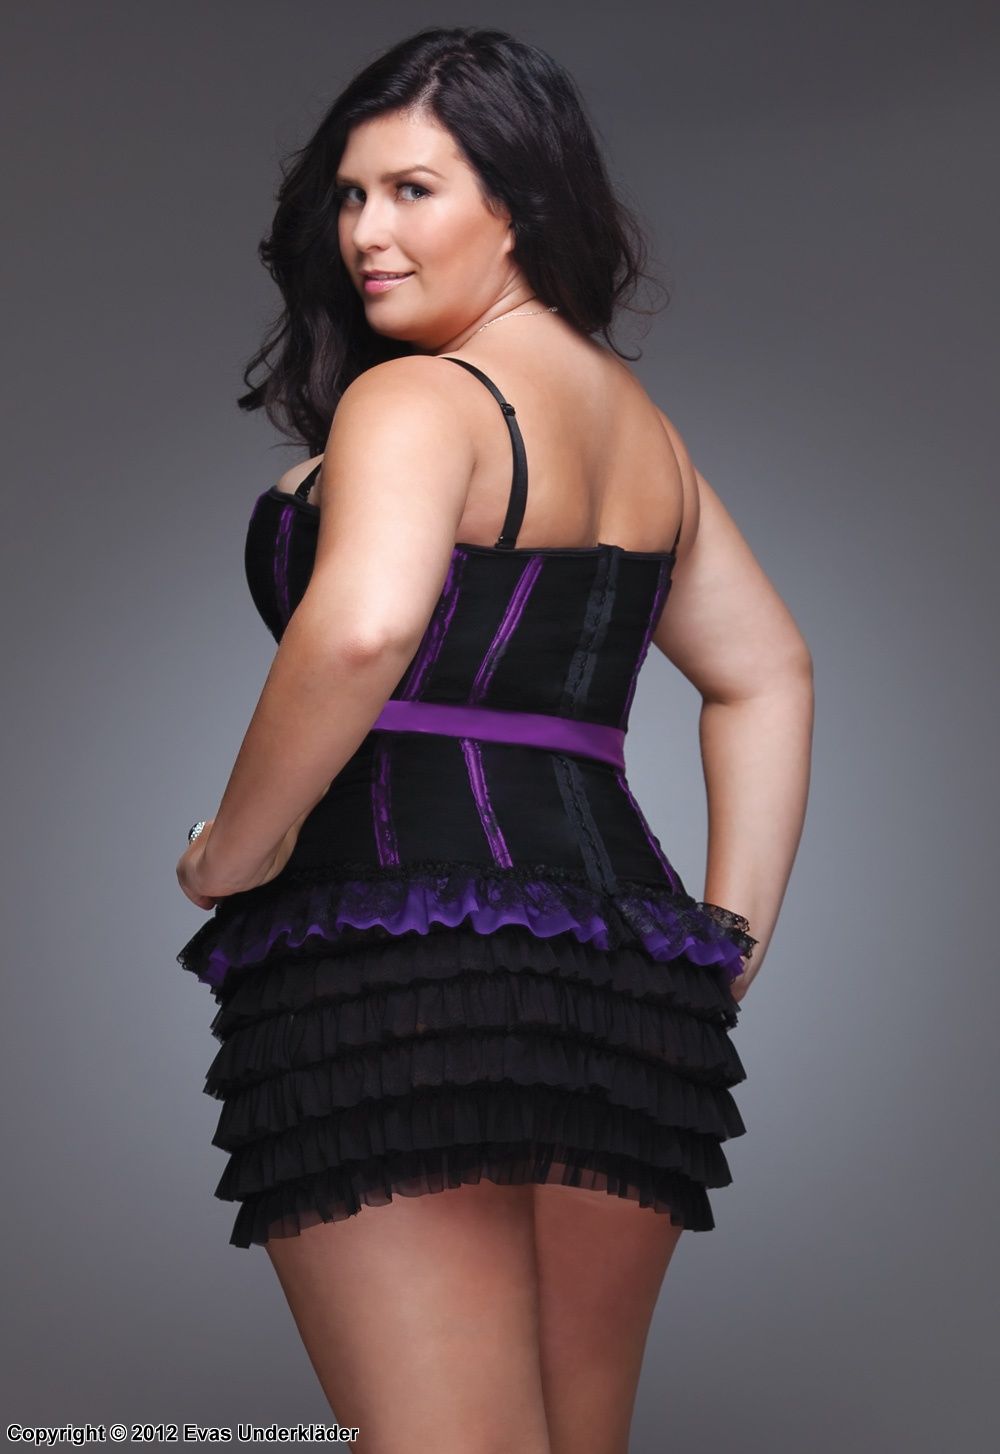 Sweetheart corset with cute lace details, plus size